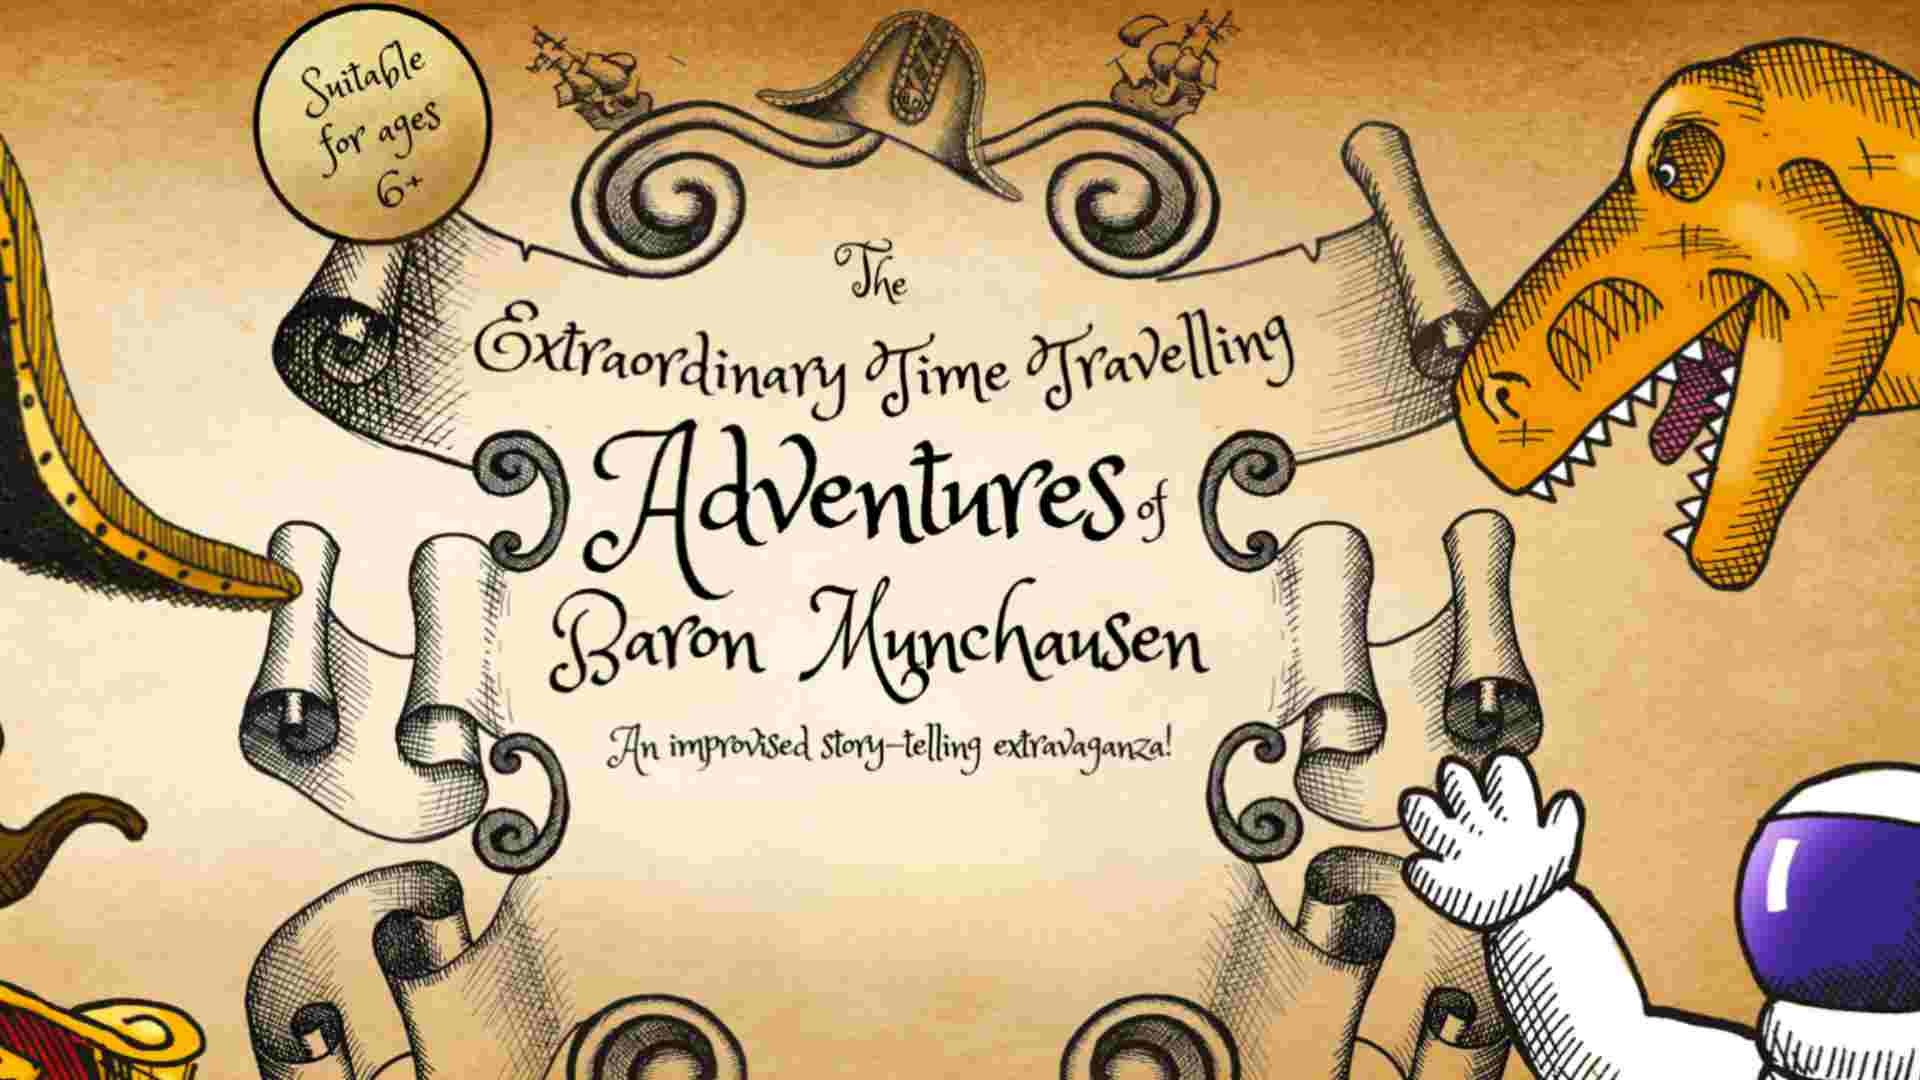 The Extraordinary Time-Travelling Adventures of Baron Munchausen